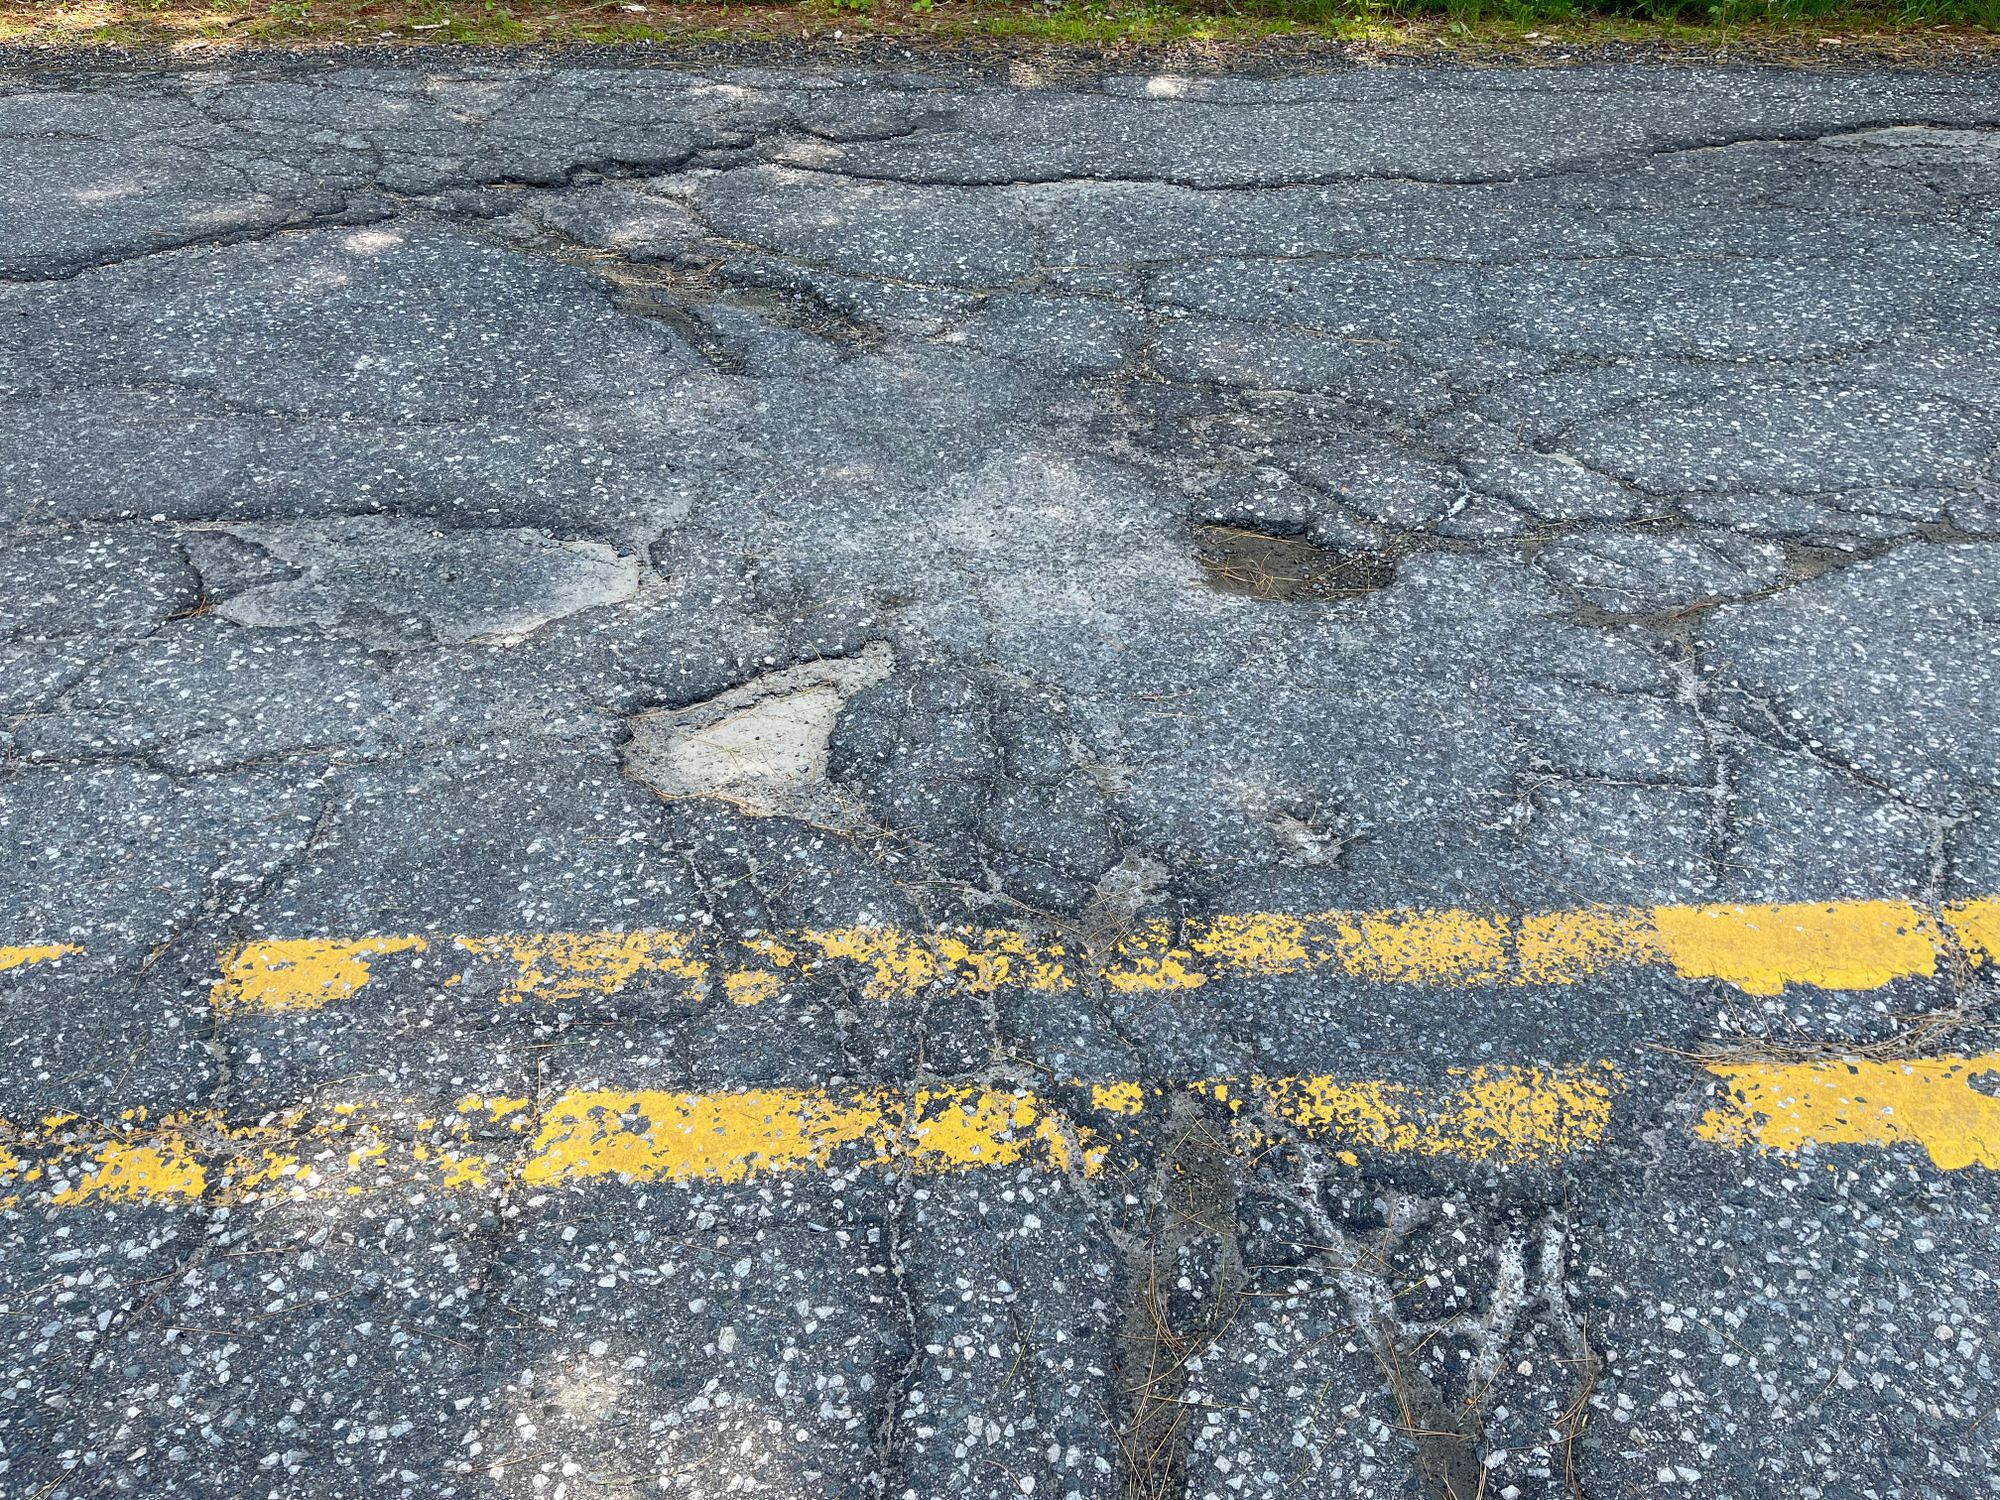 Latham Road repair delayed another year